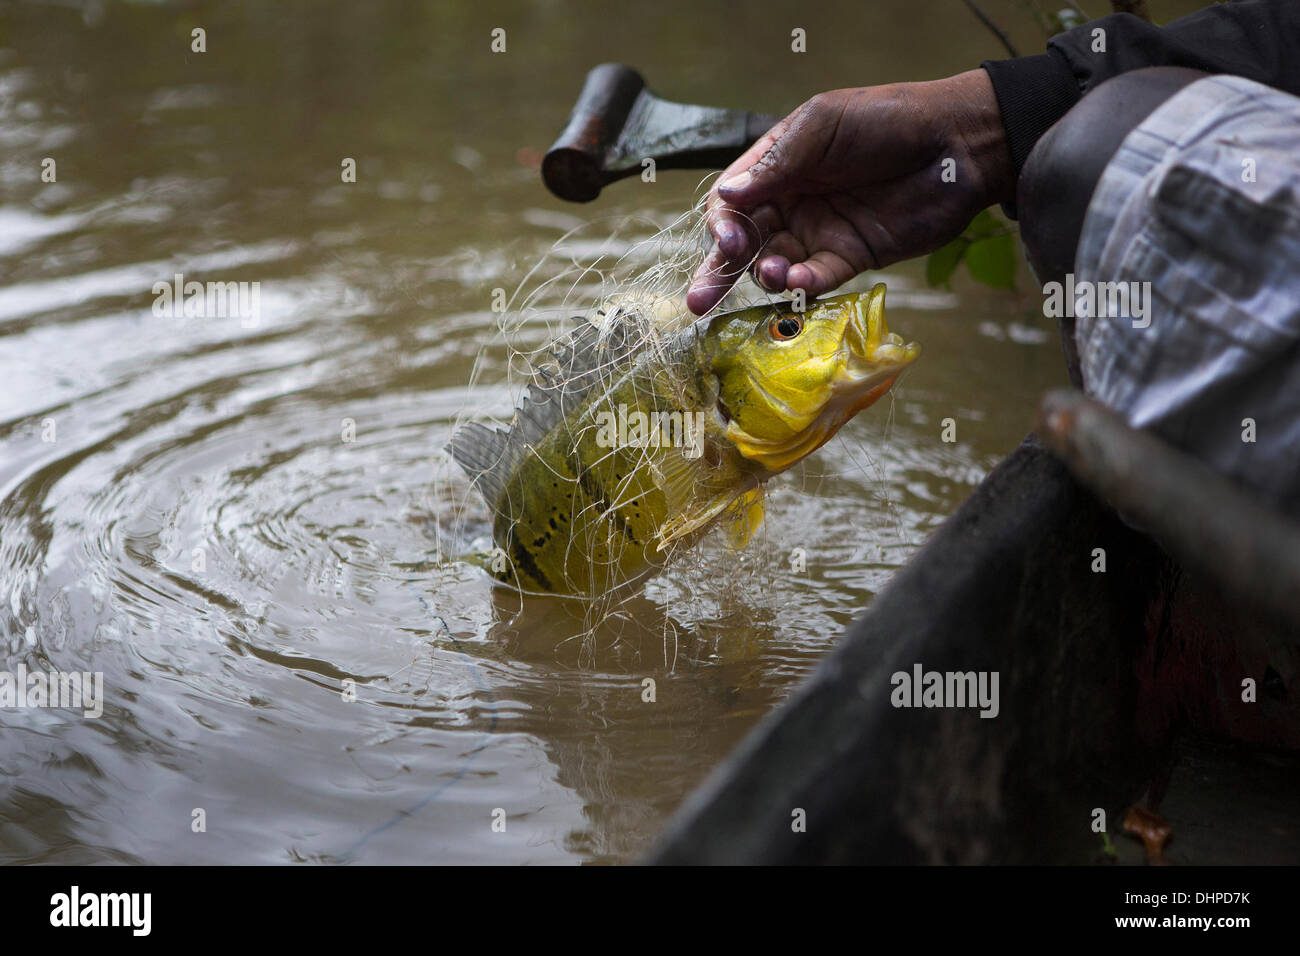 April 26, 2013 - Poti-Kro, Para, Brazil - The Amazon jungle provides the Xikrin with a varied diet including fish, game, fruits, and vegetables. Here, a villager pulls out a tmpik™ after leaving his nets in the river overnight. The indigenous Xikrin people live on the Bacaja, a tributary of the Xingu River, where construction of the Belo Monte Dam is reaching peak construction. Some scientists warn that the water level of the Bacaja will decrease precipitously due to the dam. (Credit Image: © Taylor Weidman/ZUMA Wire/ZUMAPRESS.com) Stock Photo